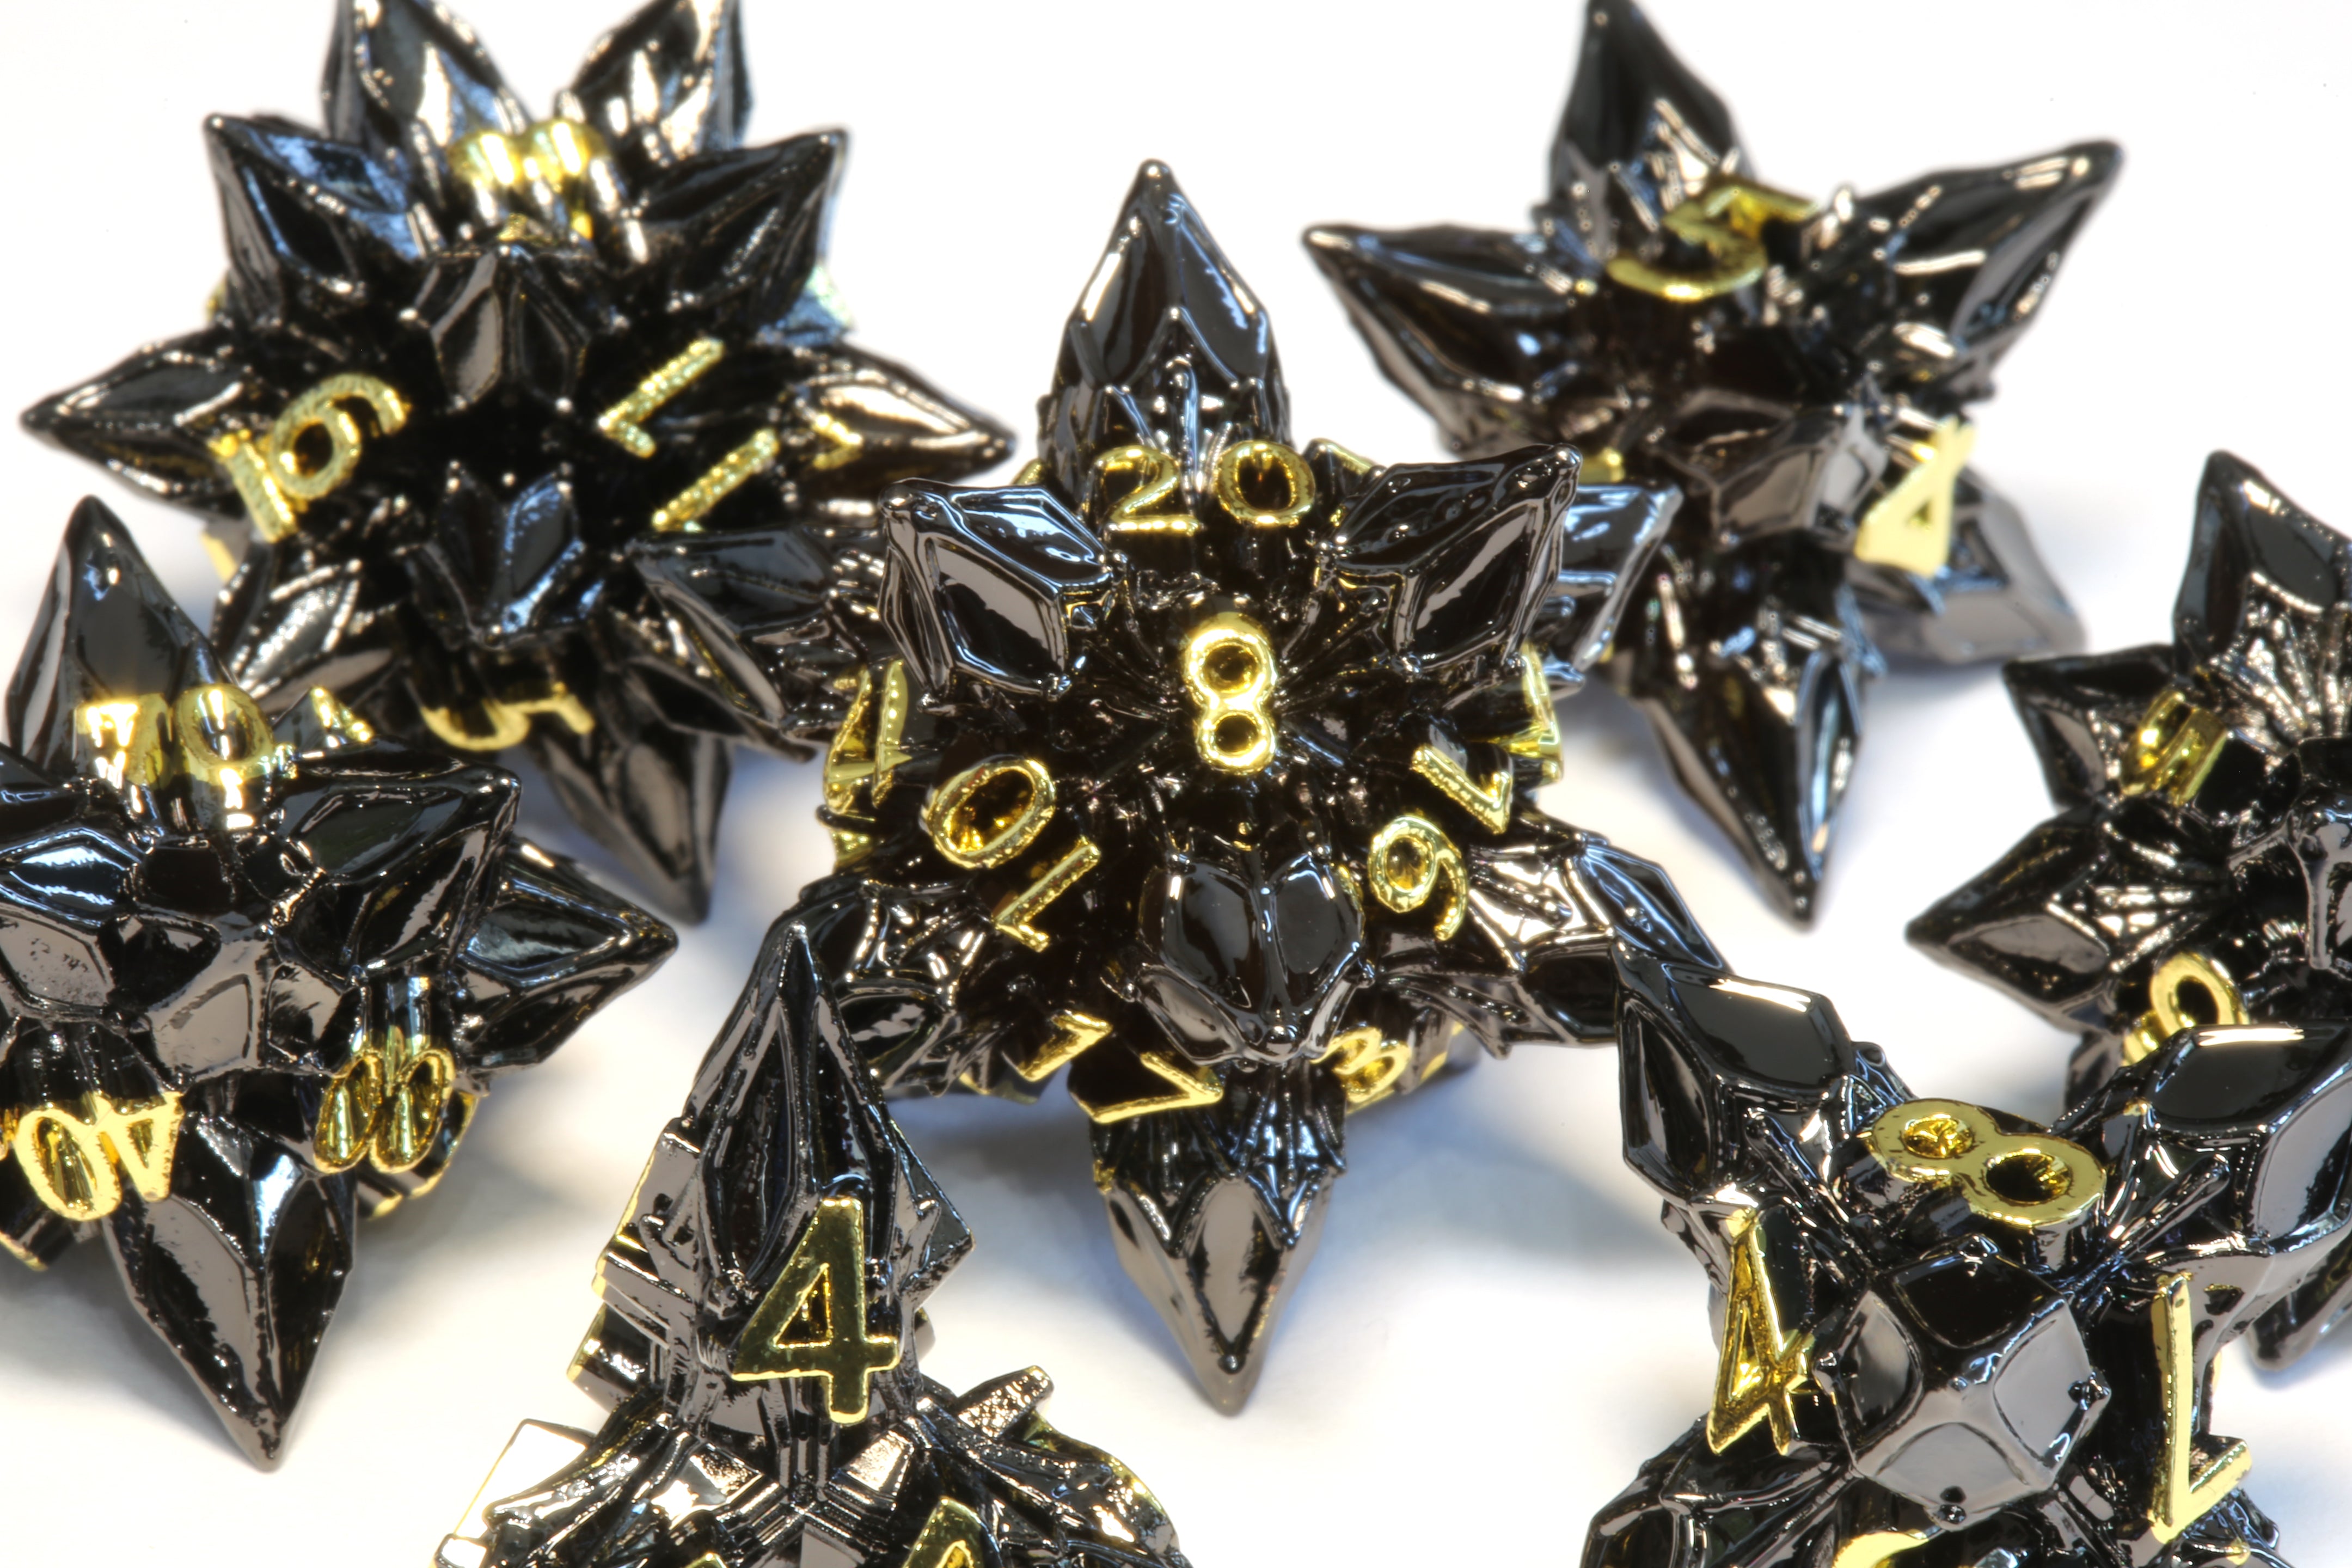 Blooming Stars Dice set - Black and gold finish